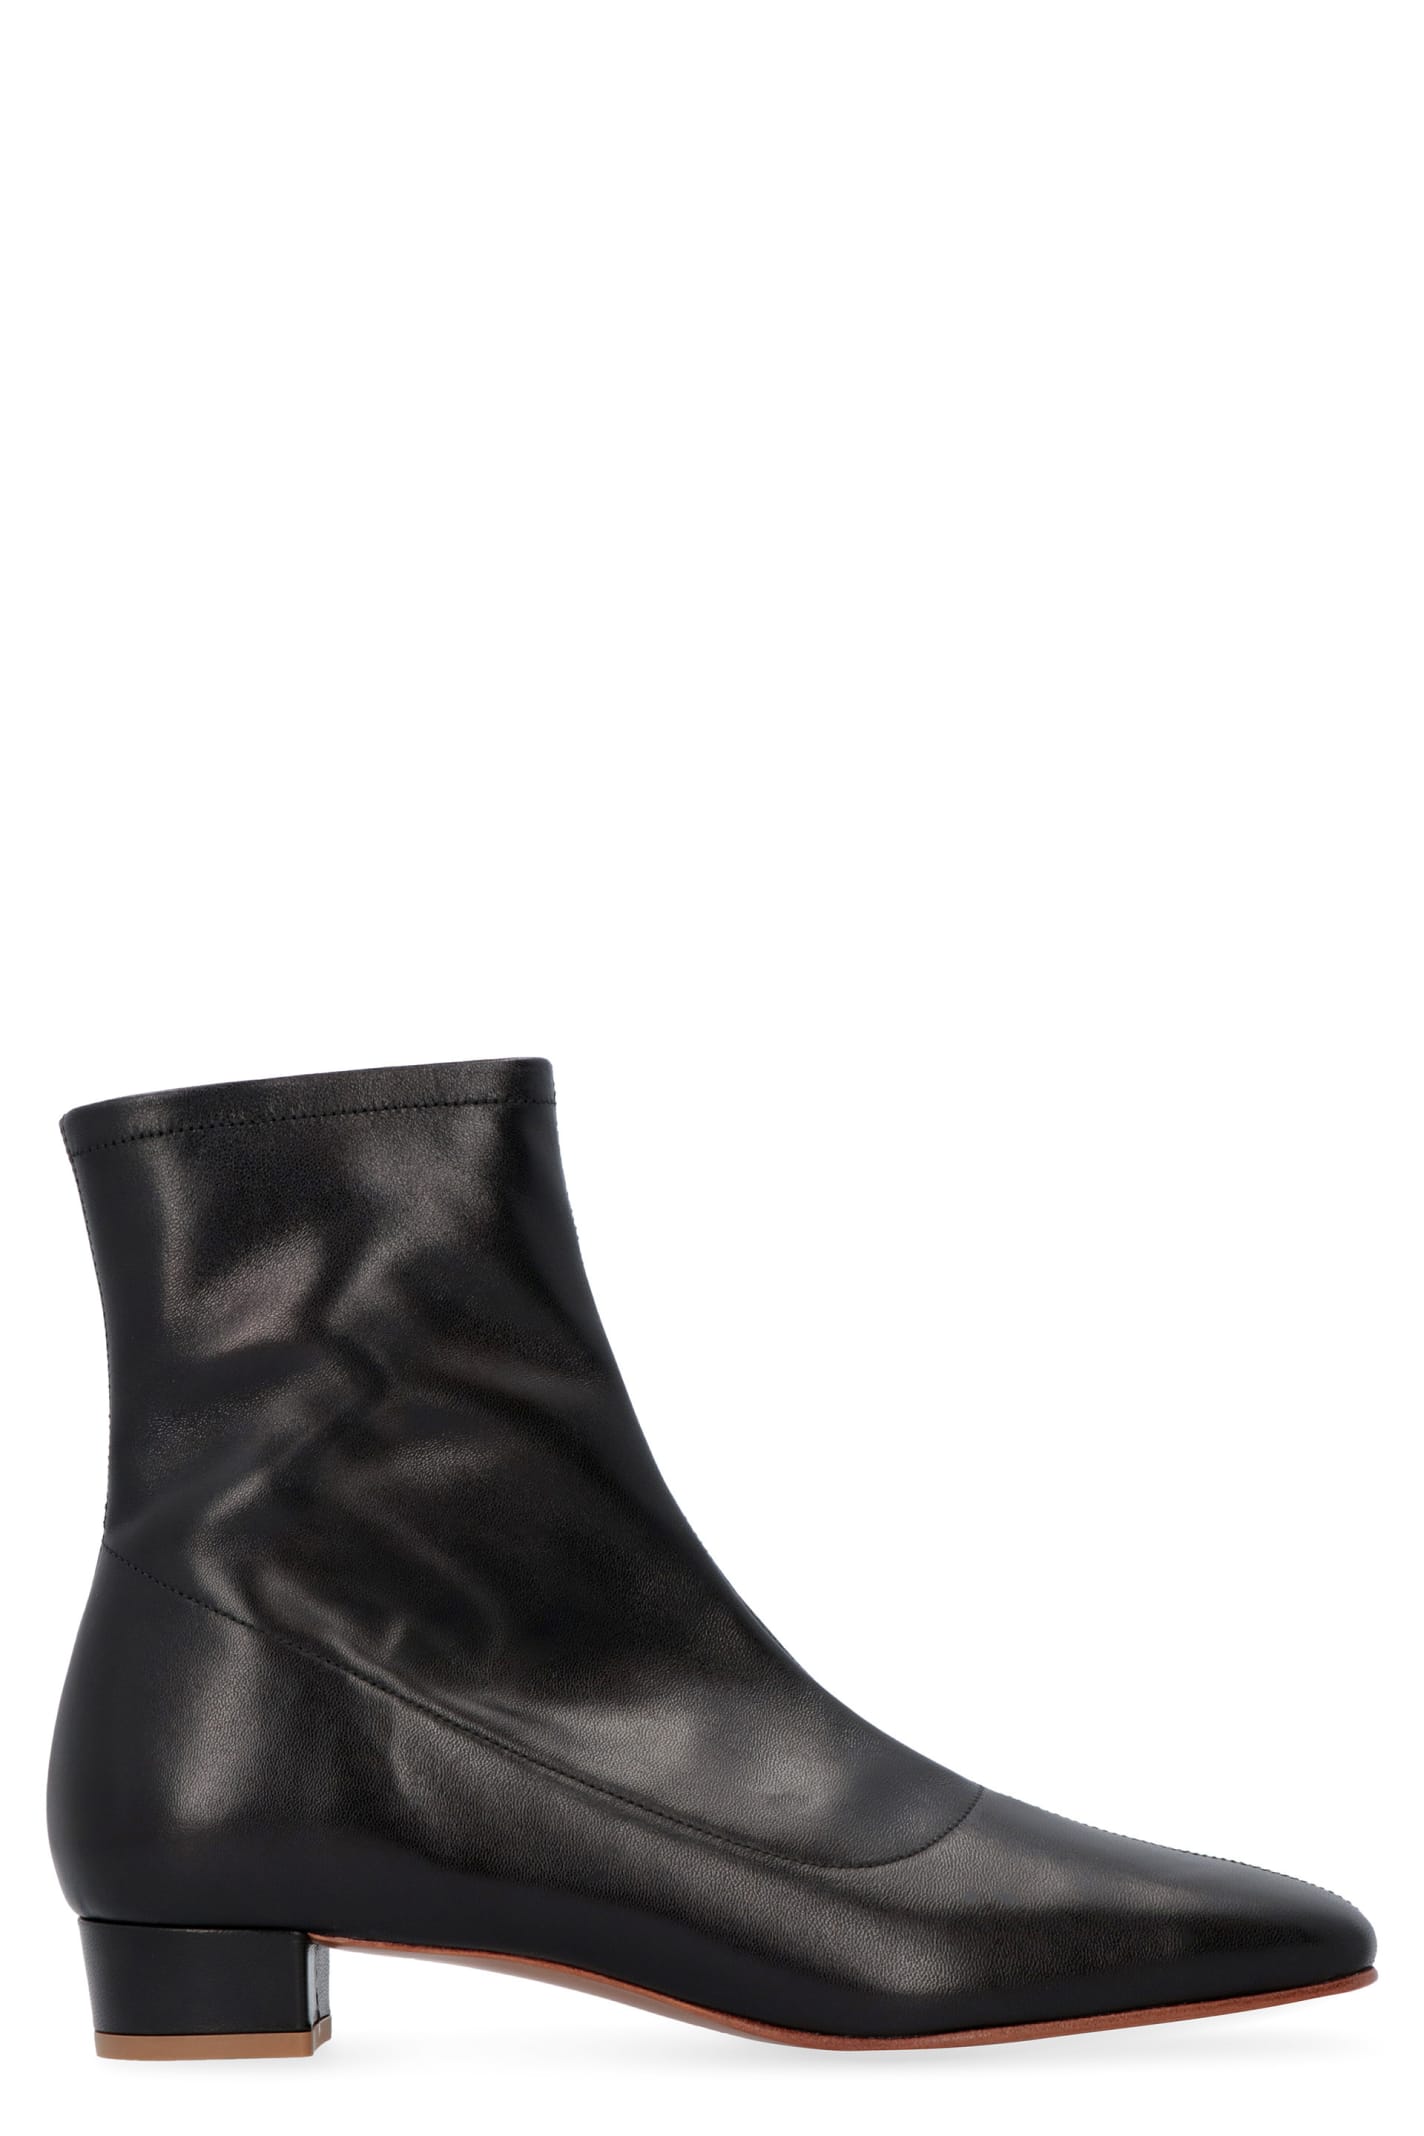 BY FAR Este Leather Ankle Boots